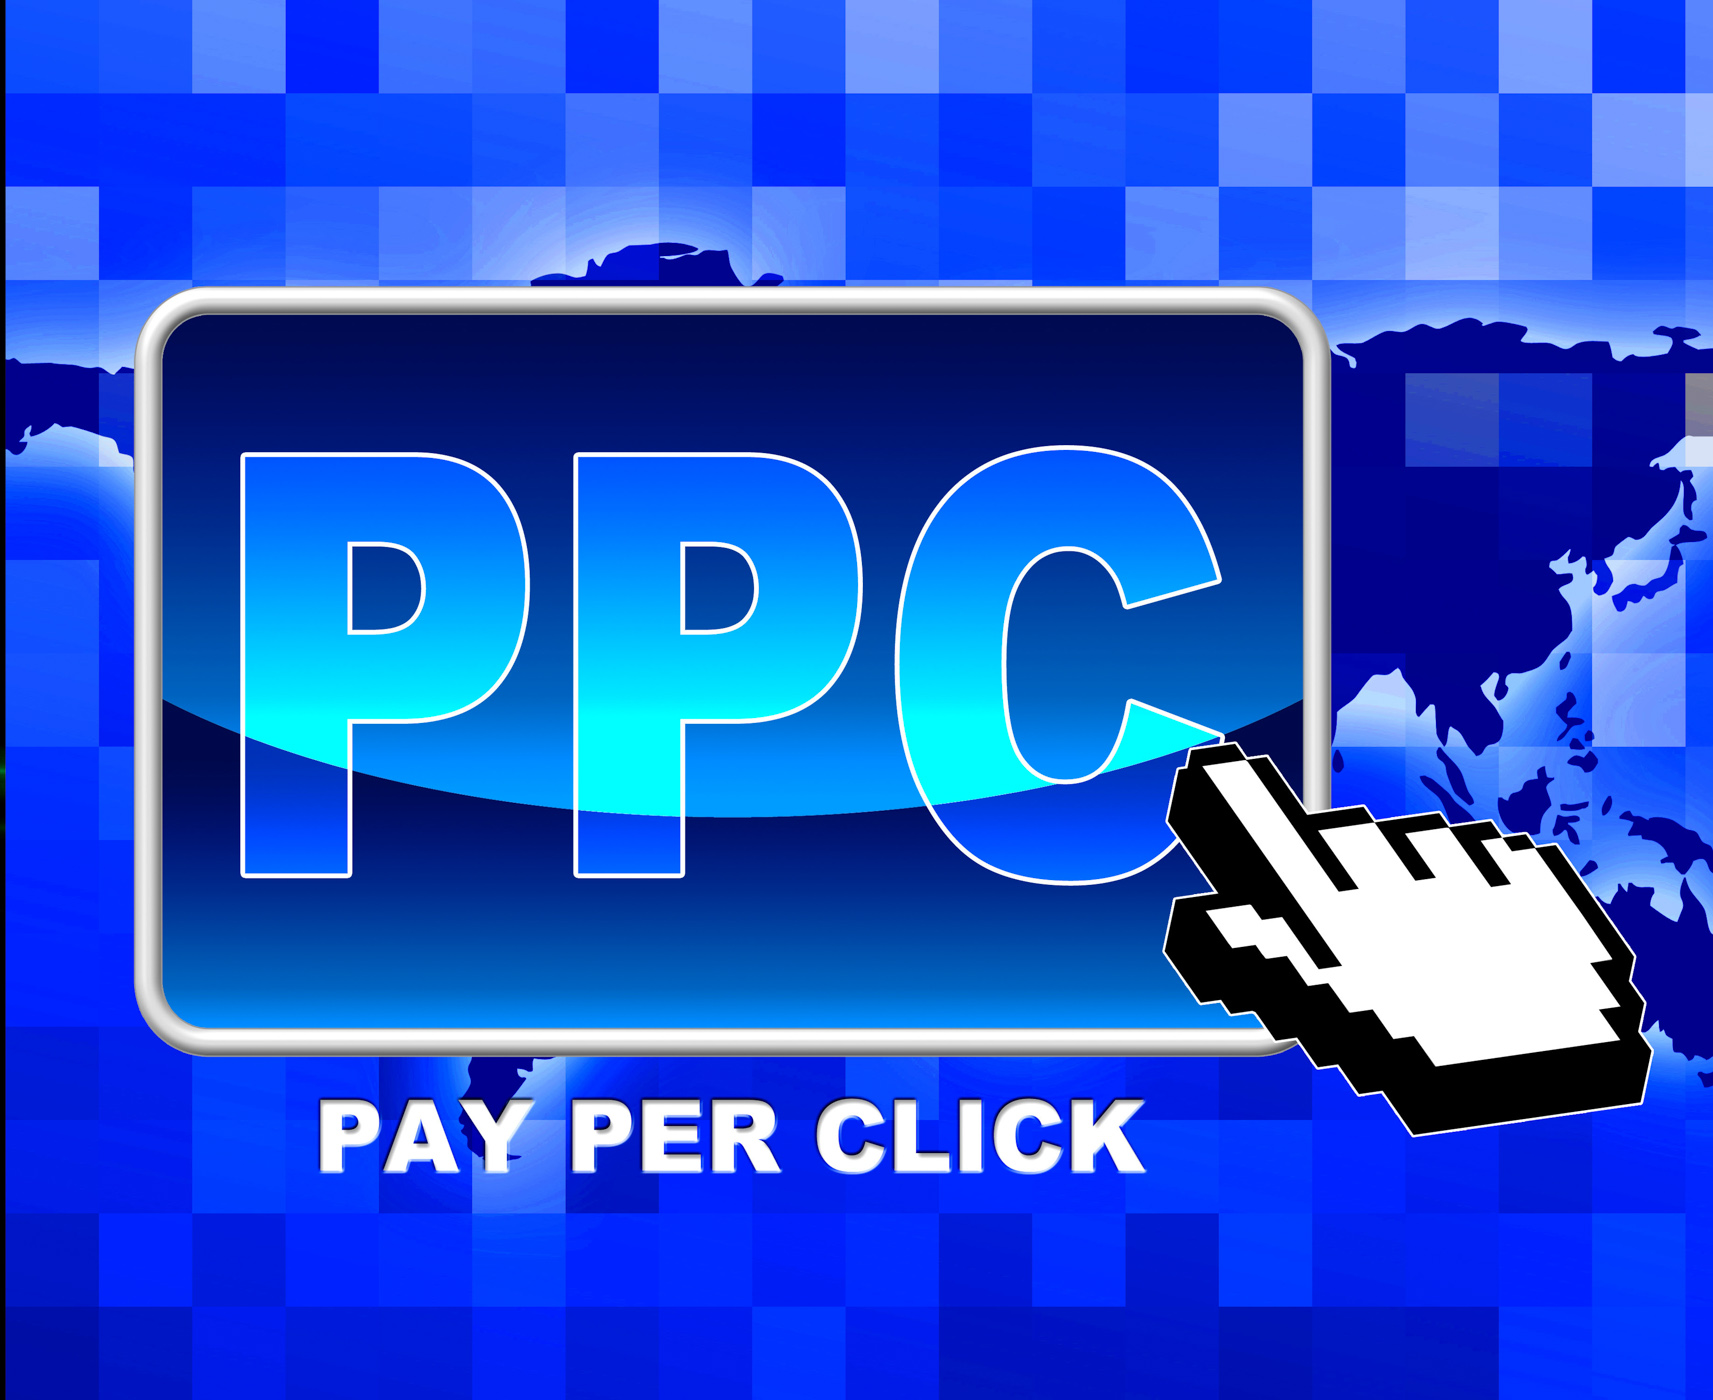 Pay per click means world wide web and advertiser photo